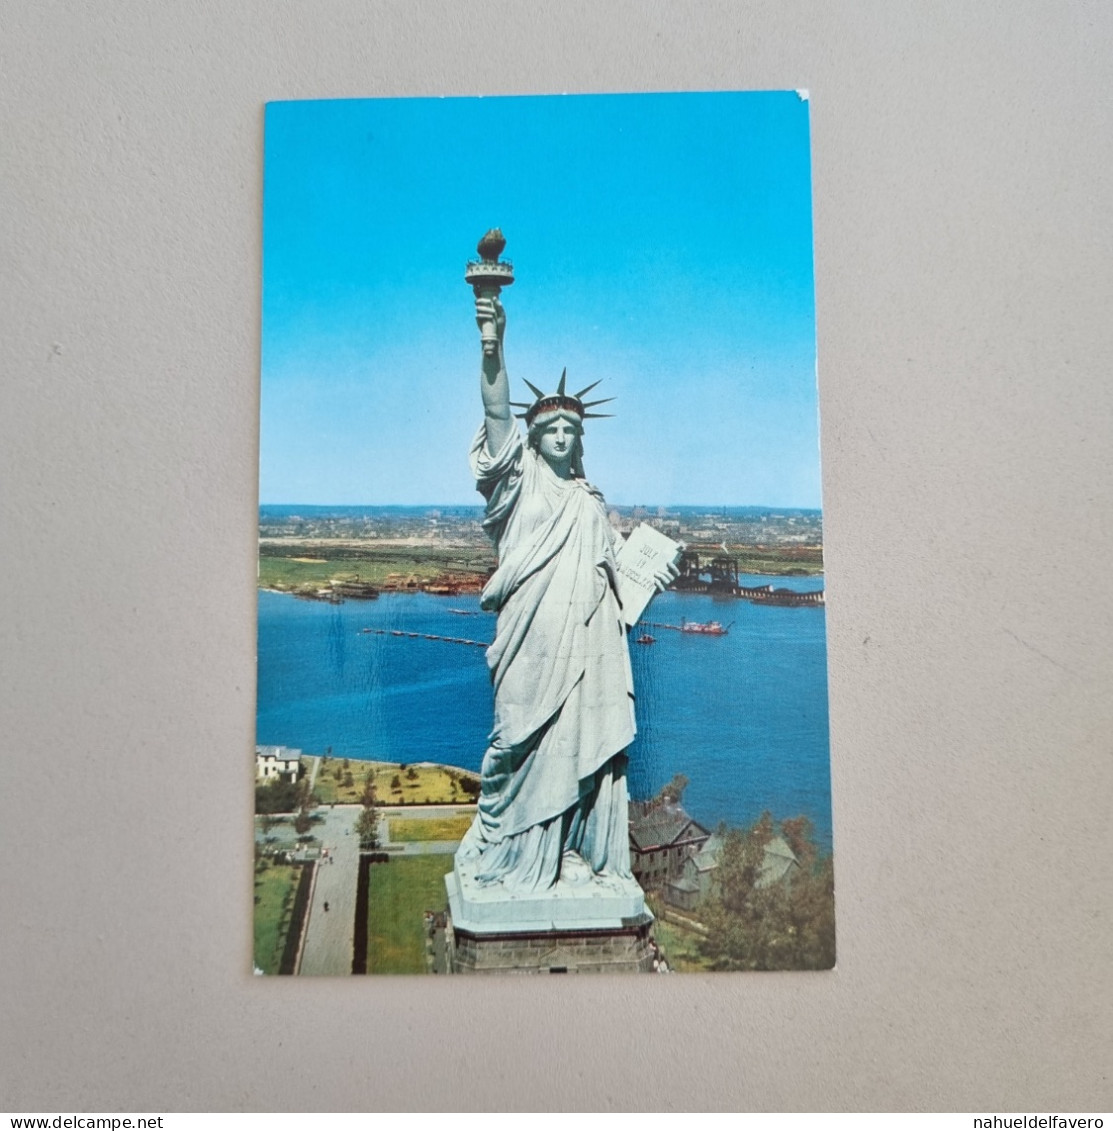 Uncirculated Postcard - NY - New York City - STATUE OF LIBERTY - Freiheitsstatue